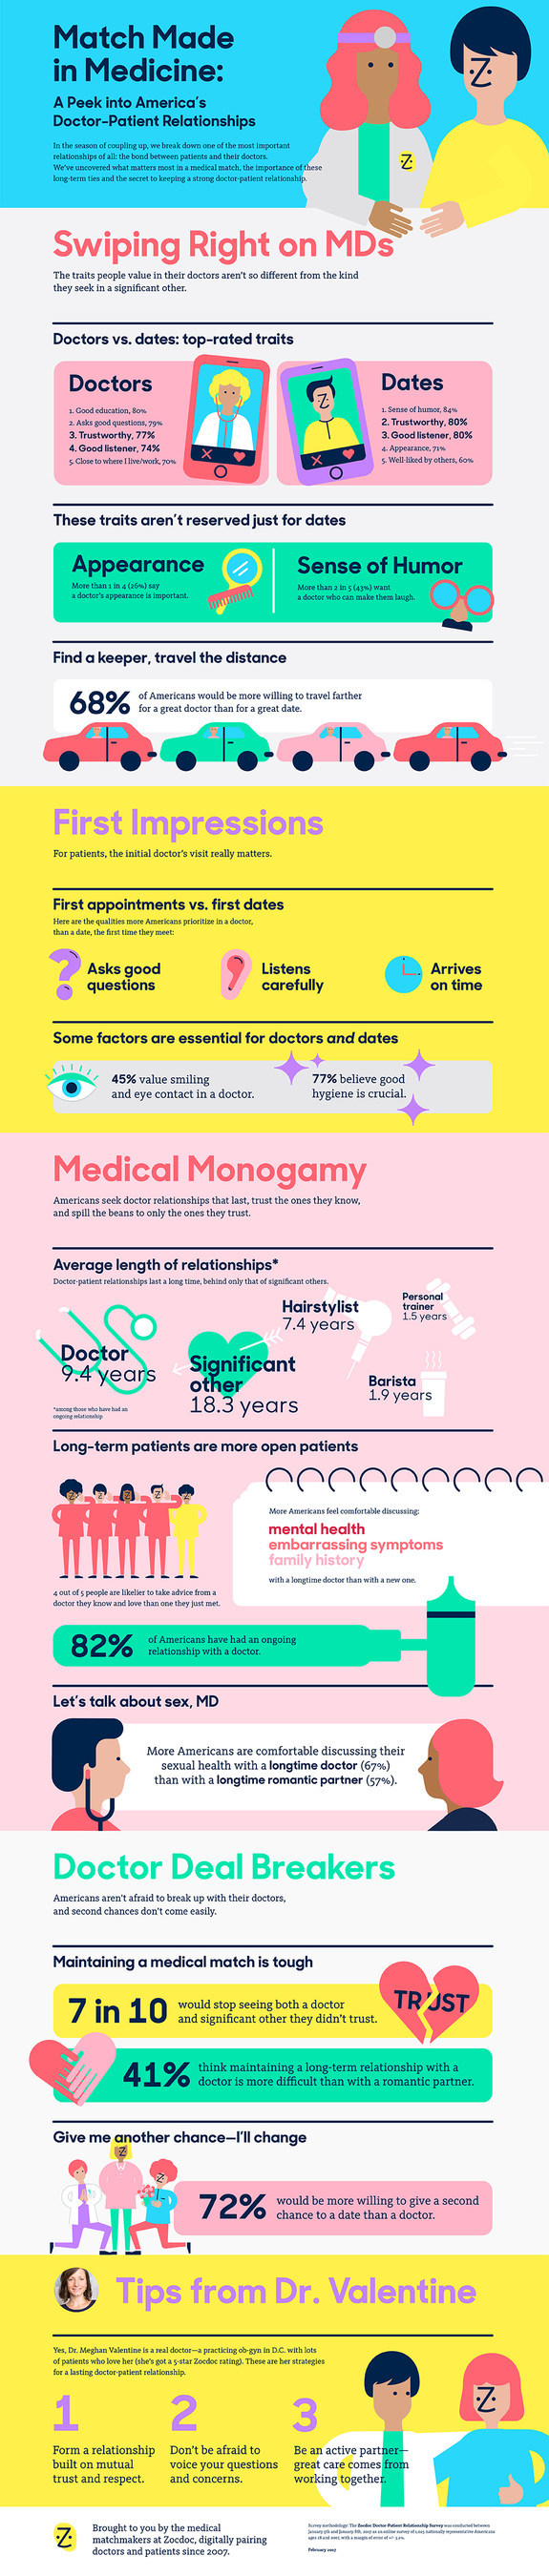 New Valentine's Day Study on the Doctor-Patient Relationship: What ...